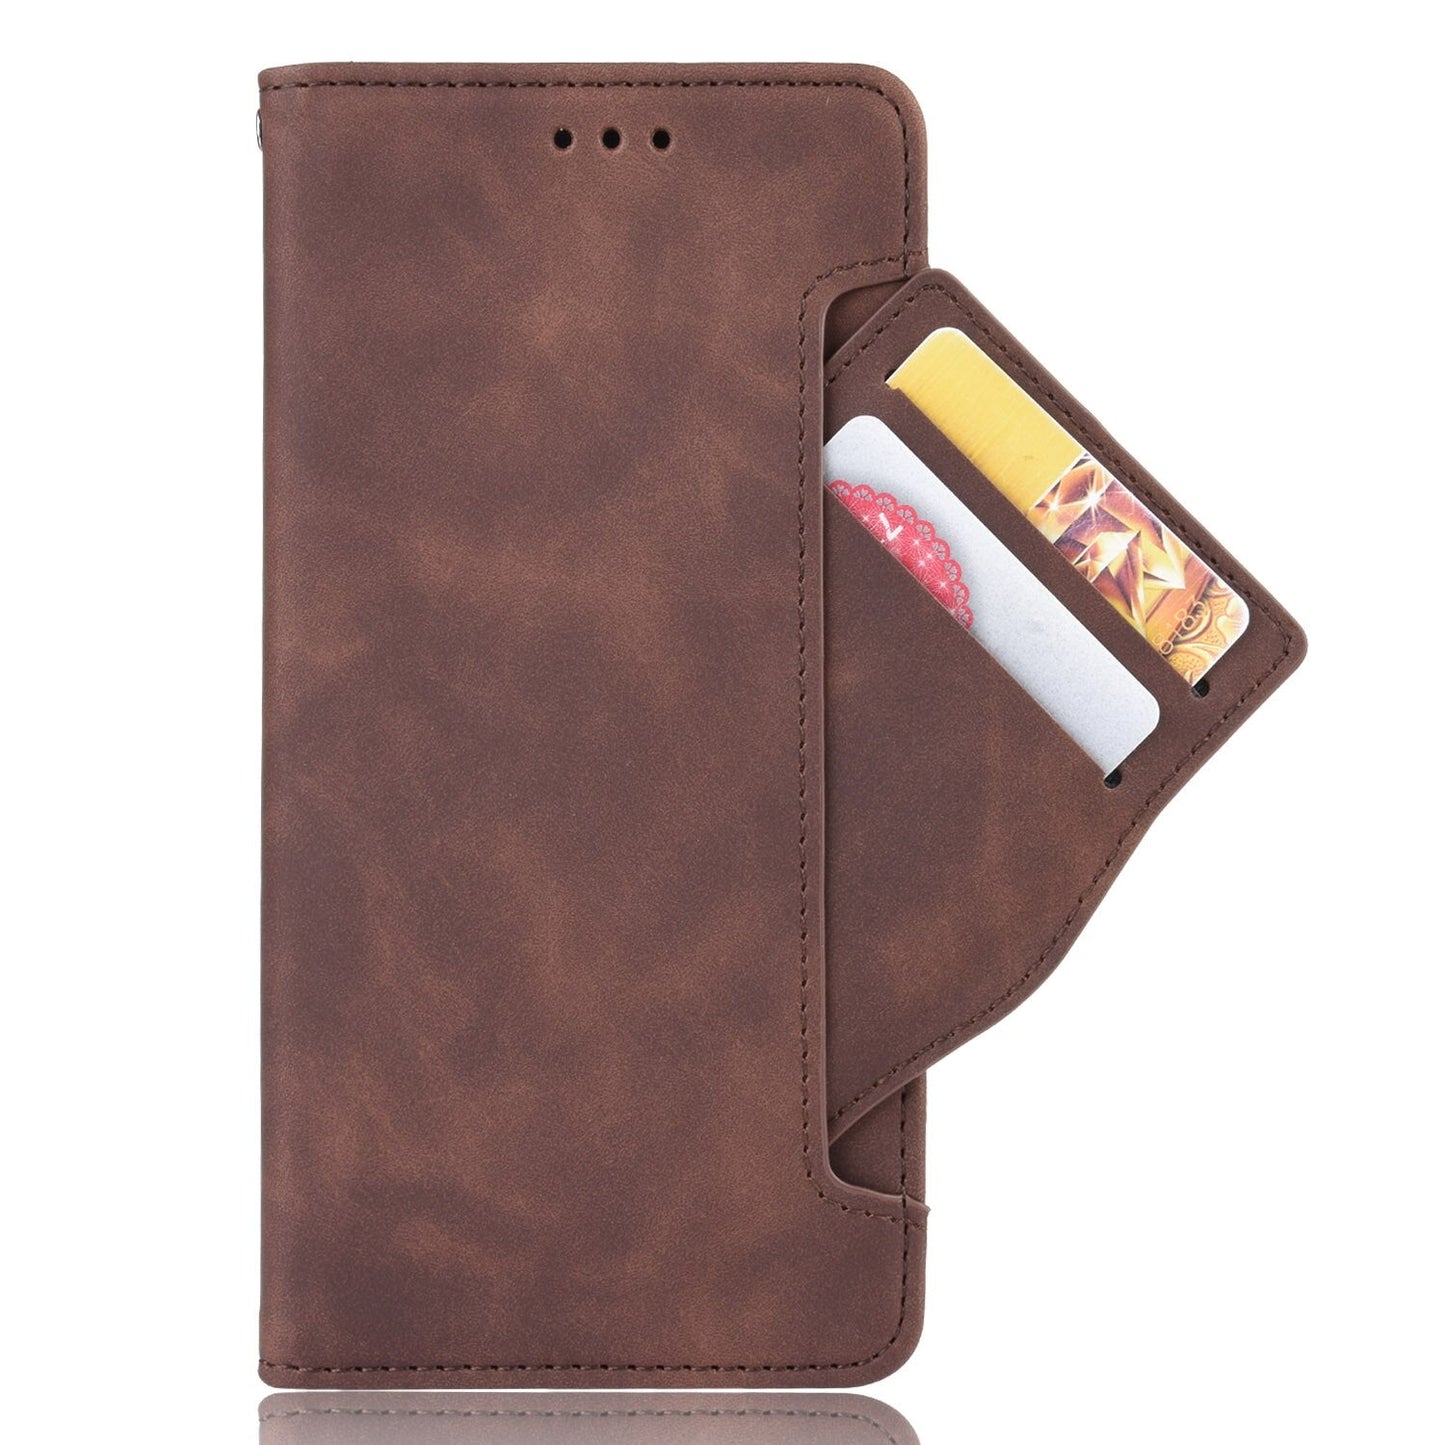 Leather Texture Wallet Case With Pen / Card Slot